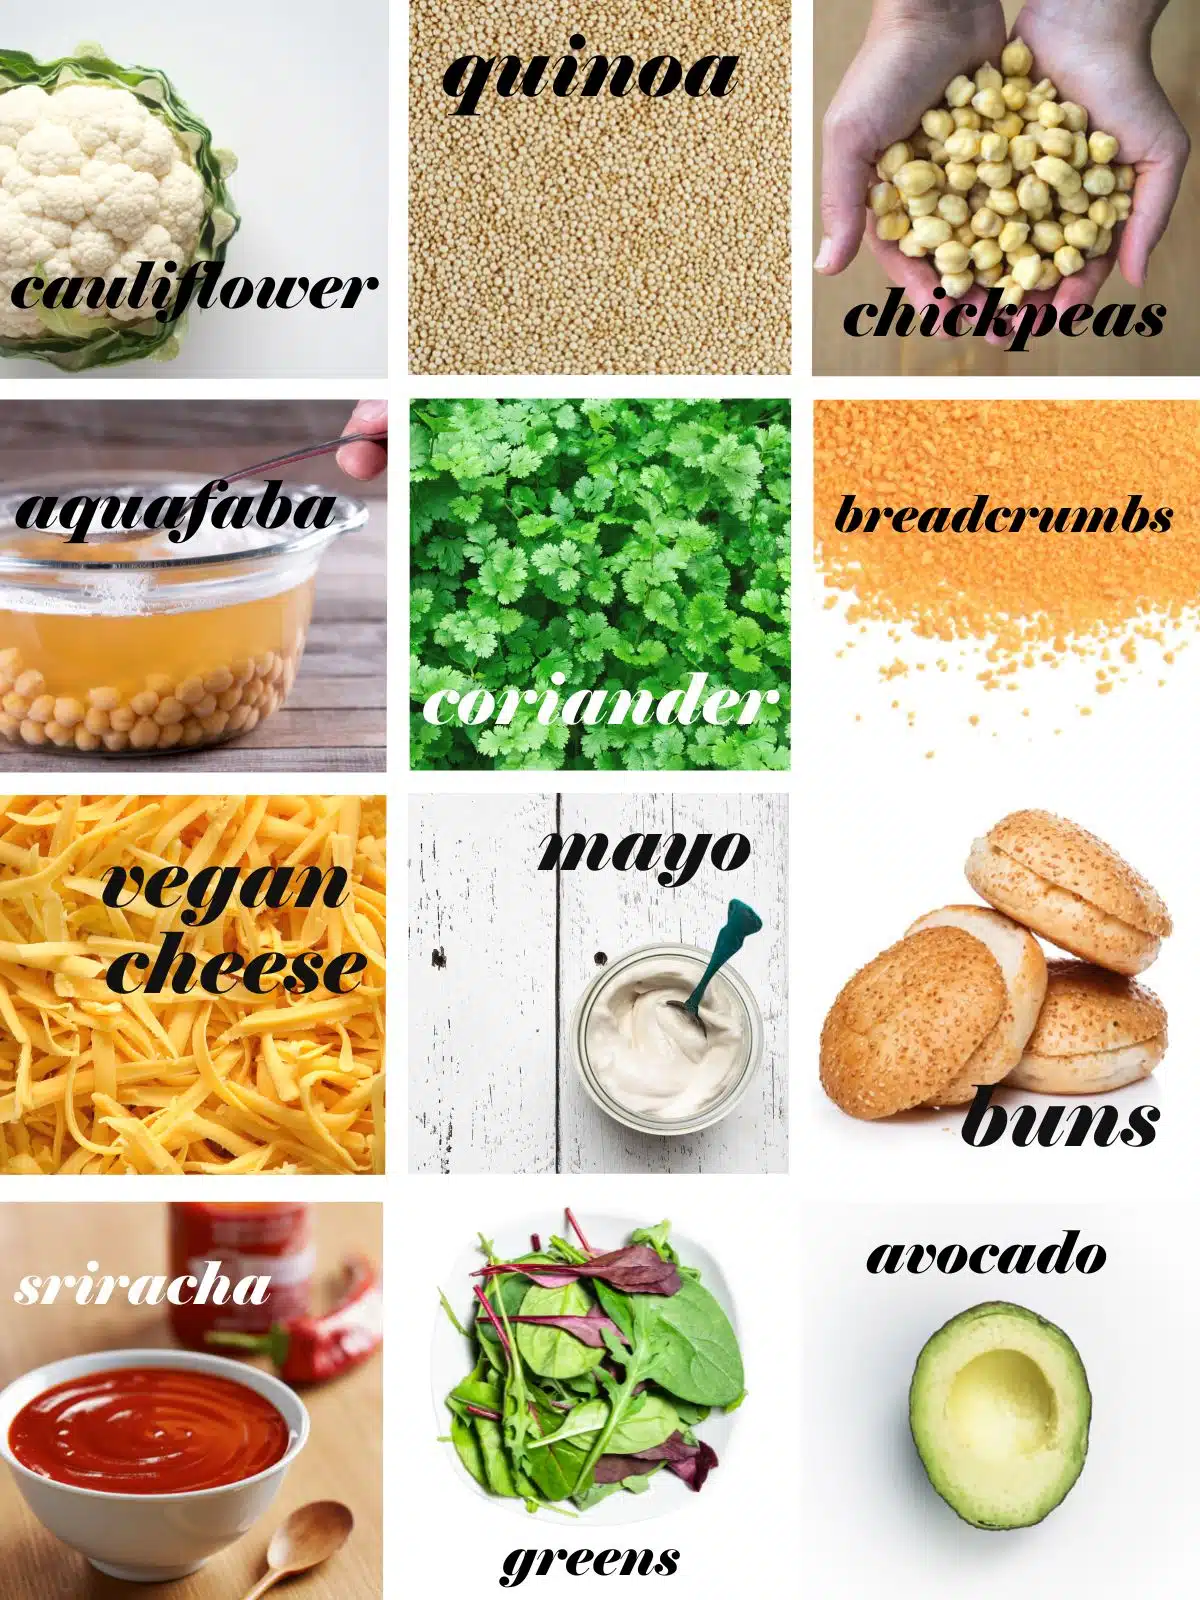 Cauliflower burger ingredients in a grid with labels.